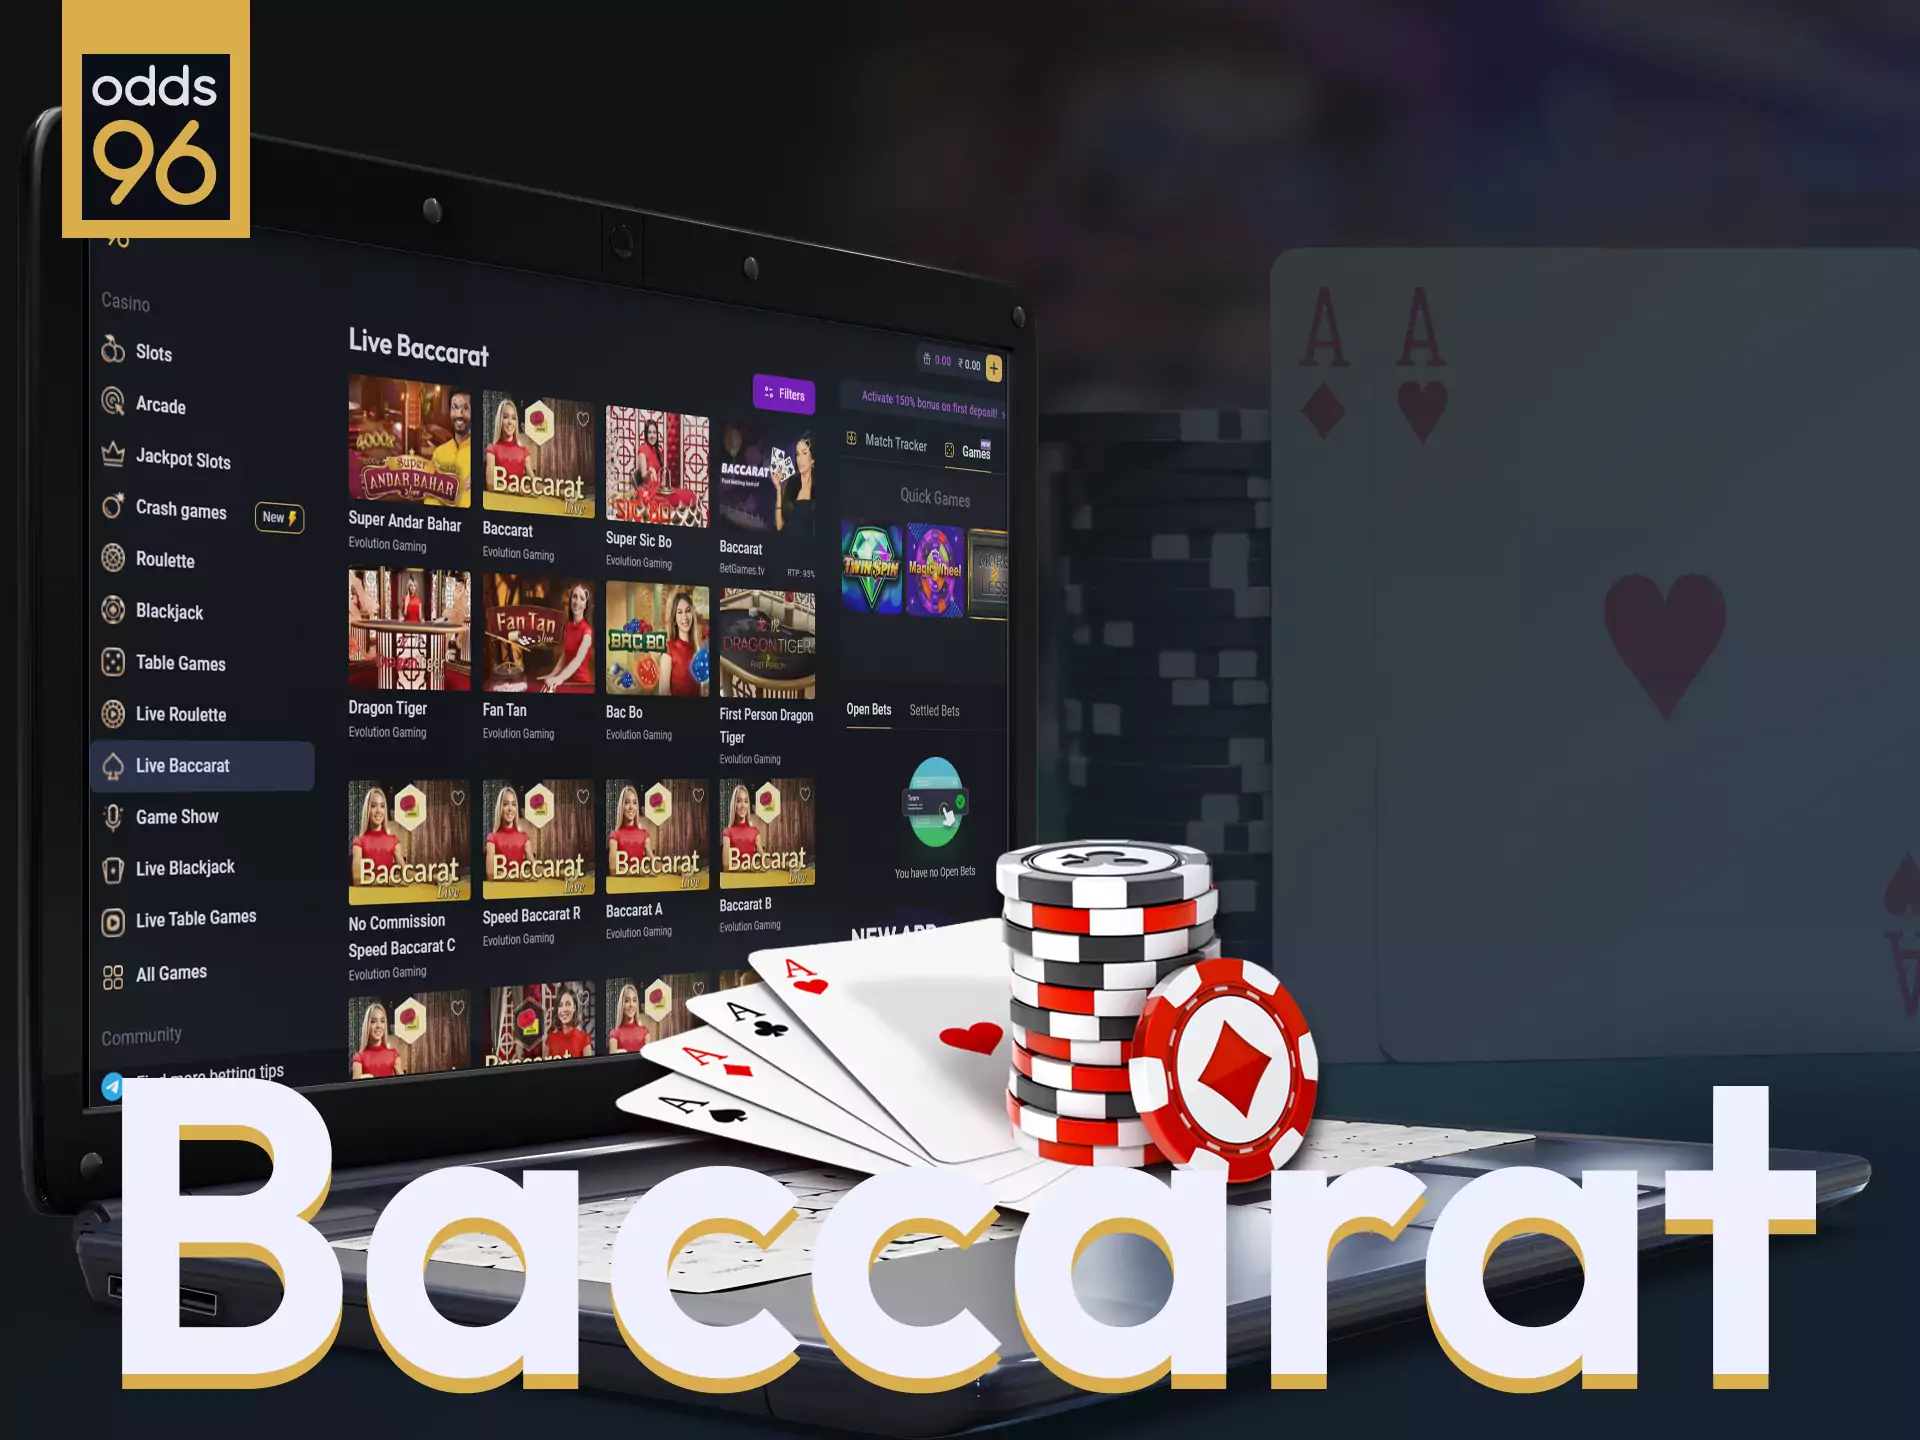 Place bets at Odds96 casino on baccarat.